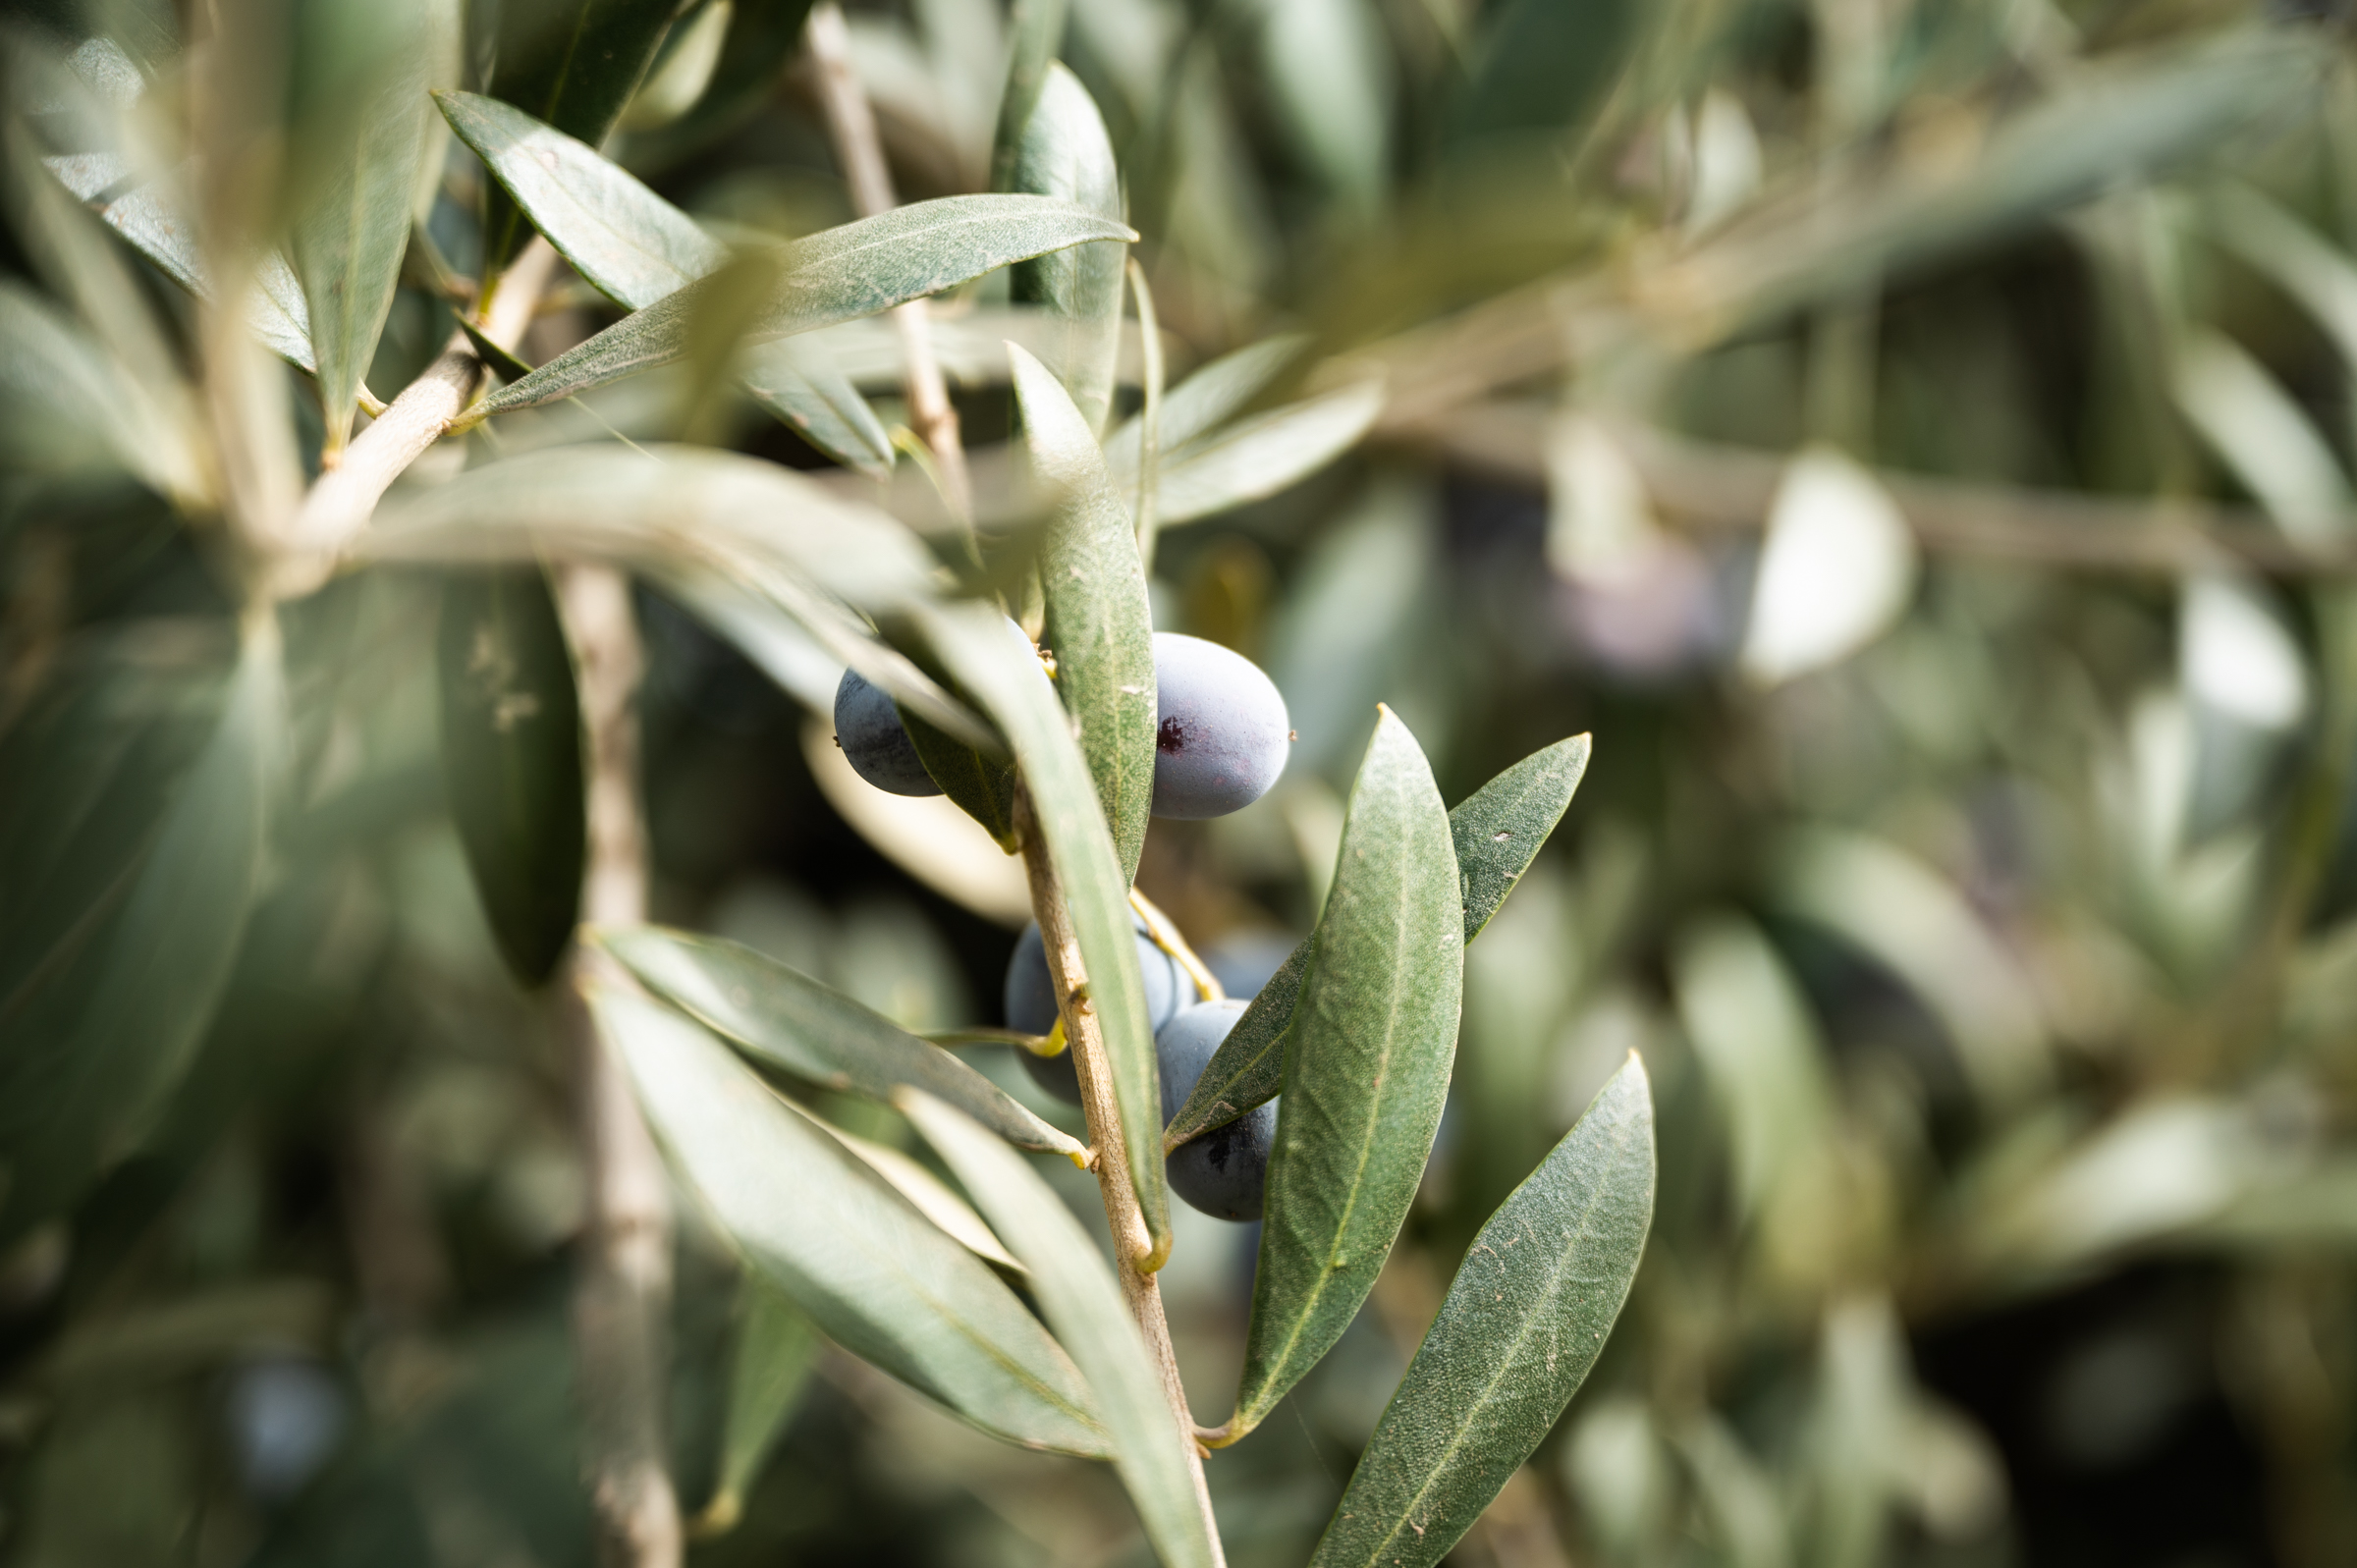 Olives ripen on a hedgerow in Fresno, California